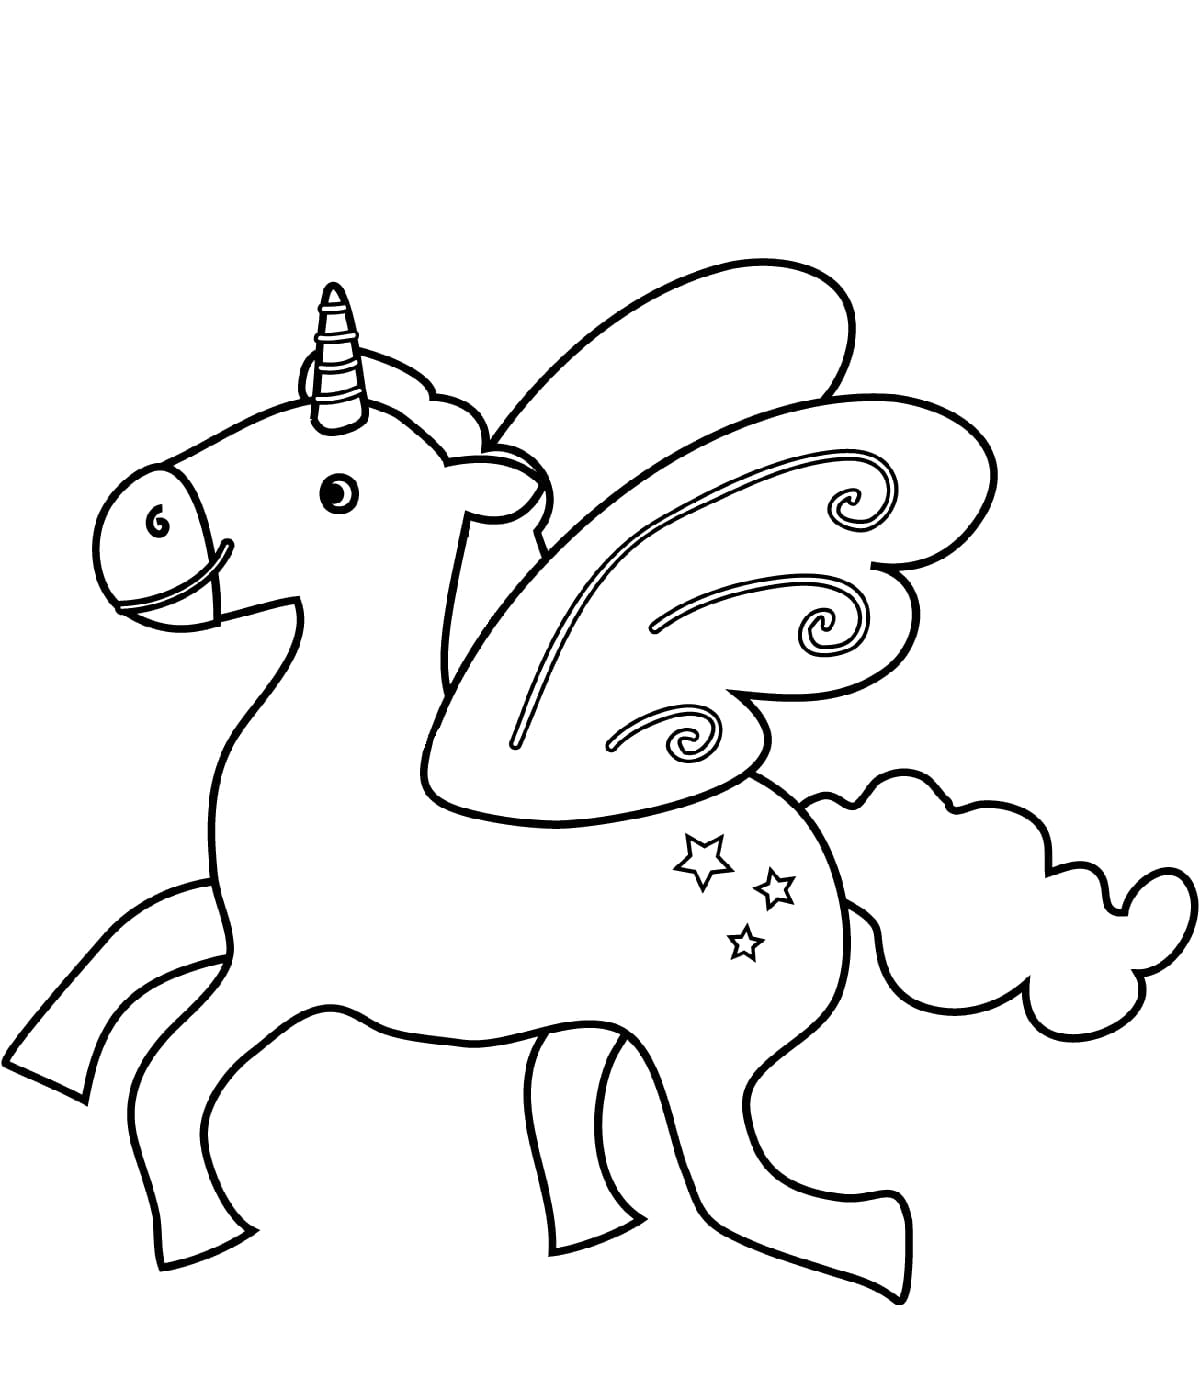 Butterfly Winged Unicorn Coloring Page